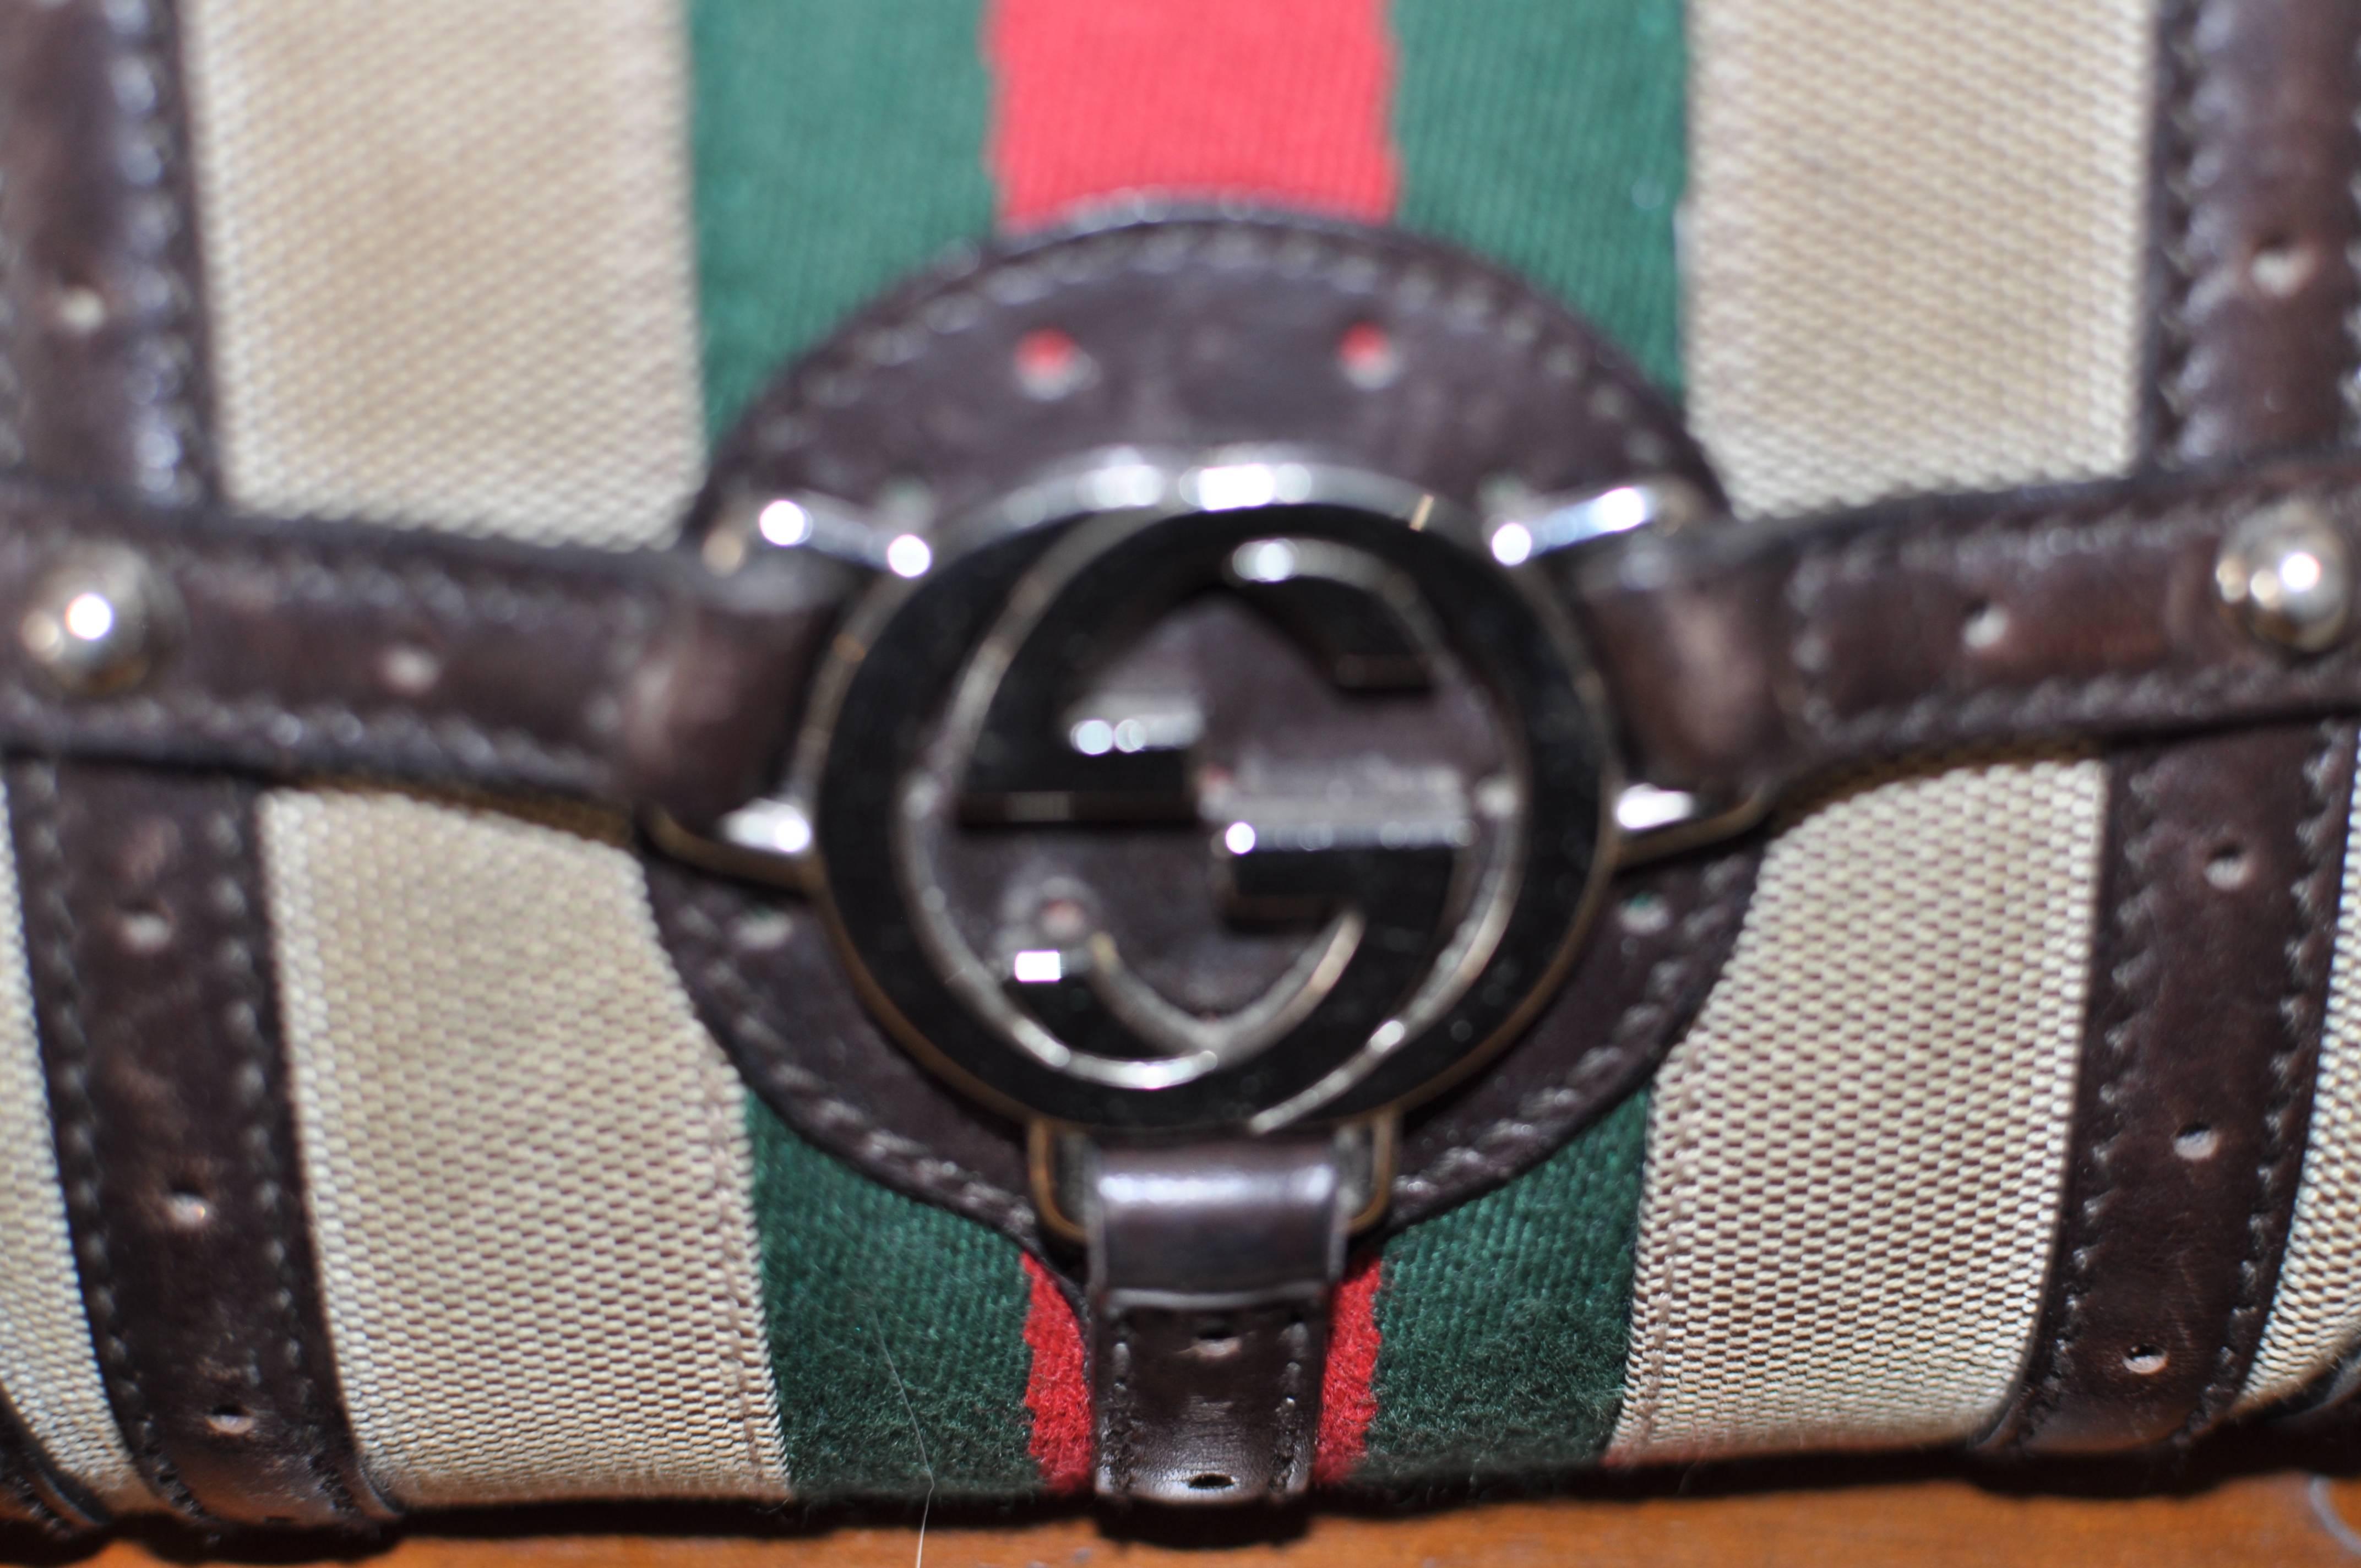 Features include a silver double G in front anchoring vertical and horizontal leather straps; top zip closing; one slot pocket; Gucci logo lining; Certificate of Authenticity and a customized purse adornment.

There is some scuffing to the corner